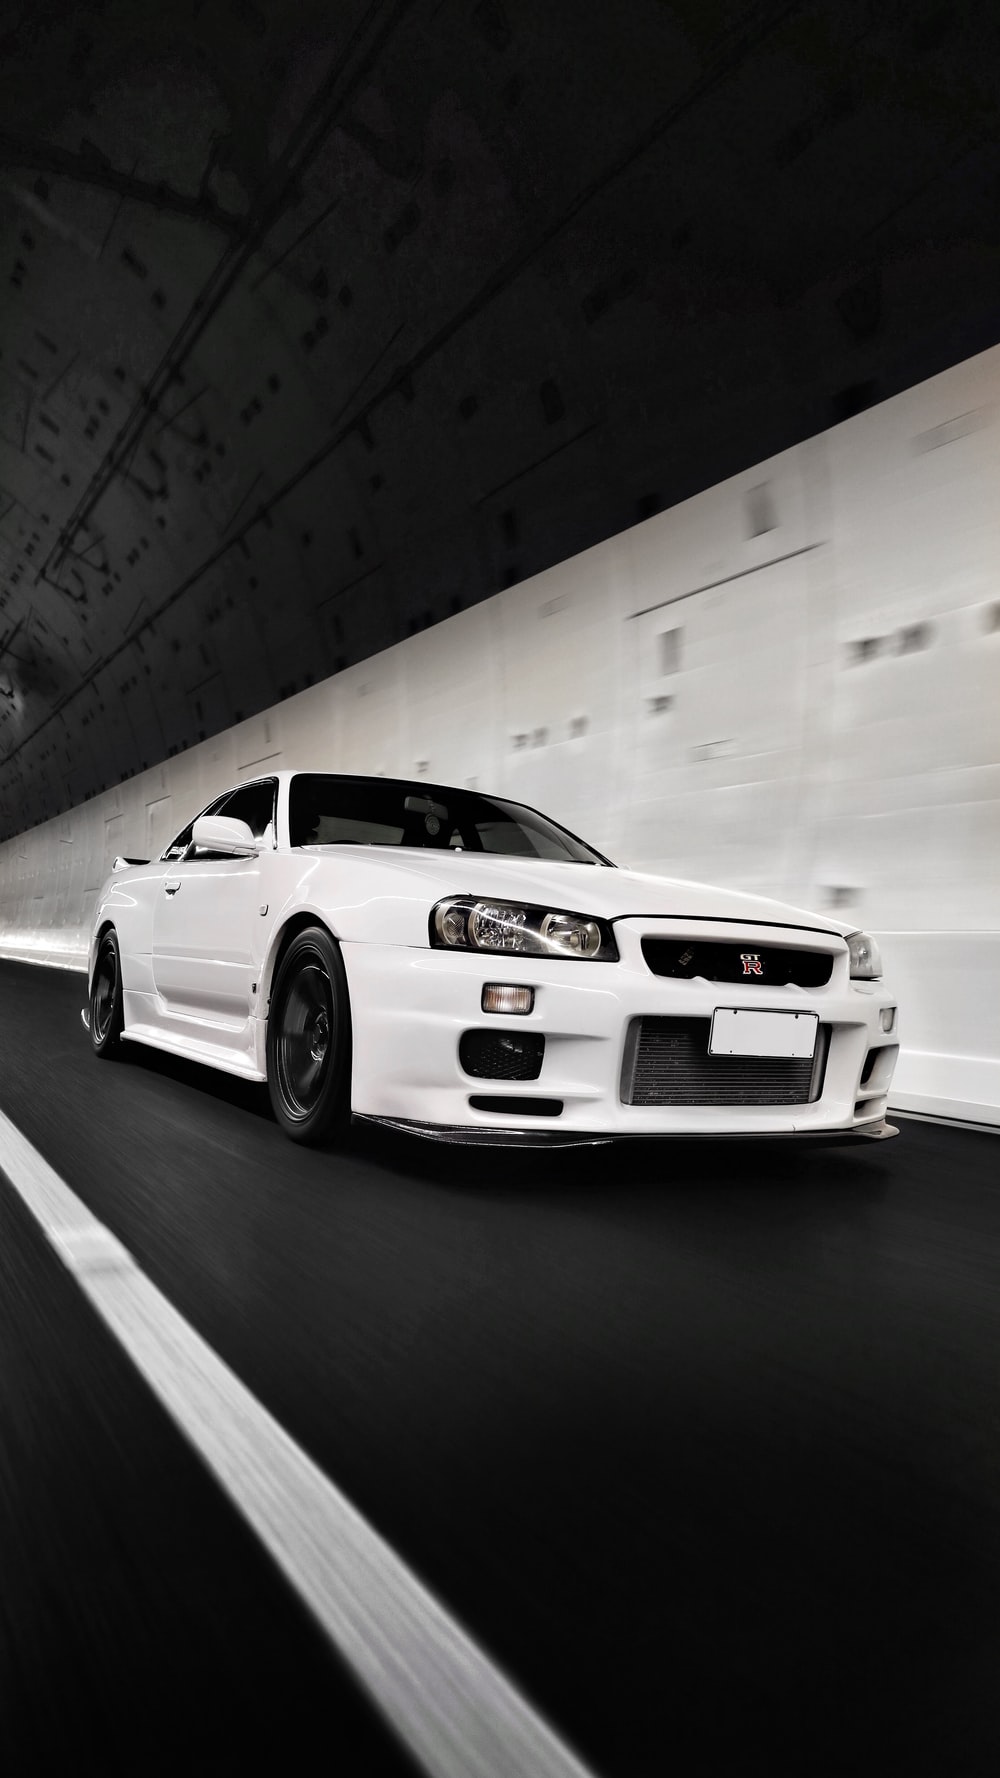 Nissan Gtr R34 Picture. Download Free Image